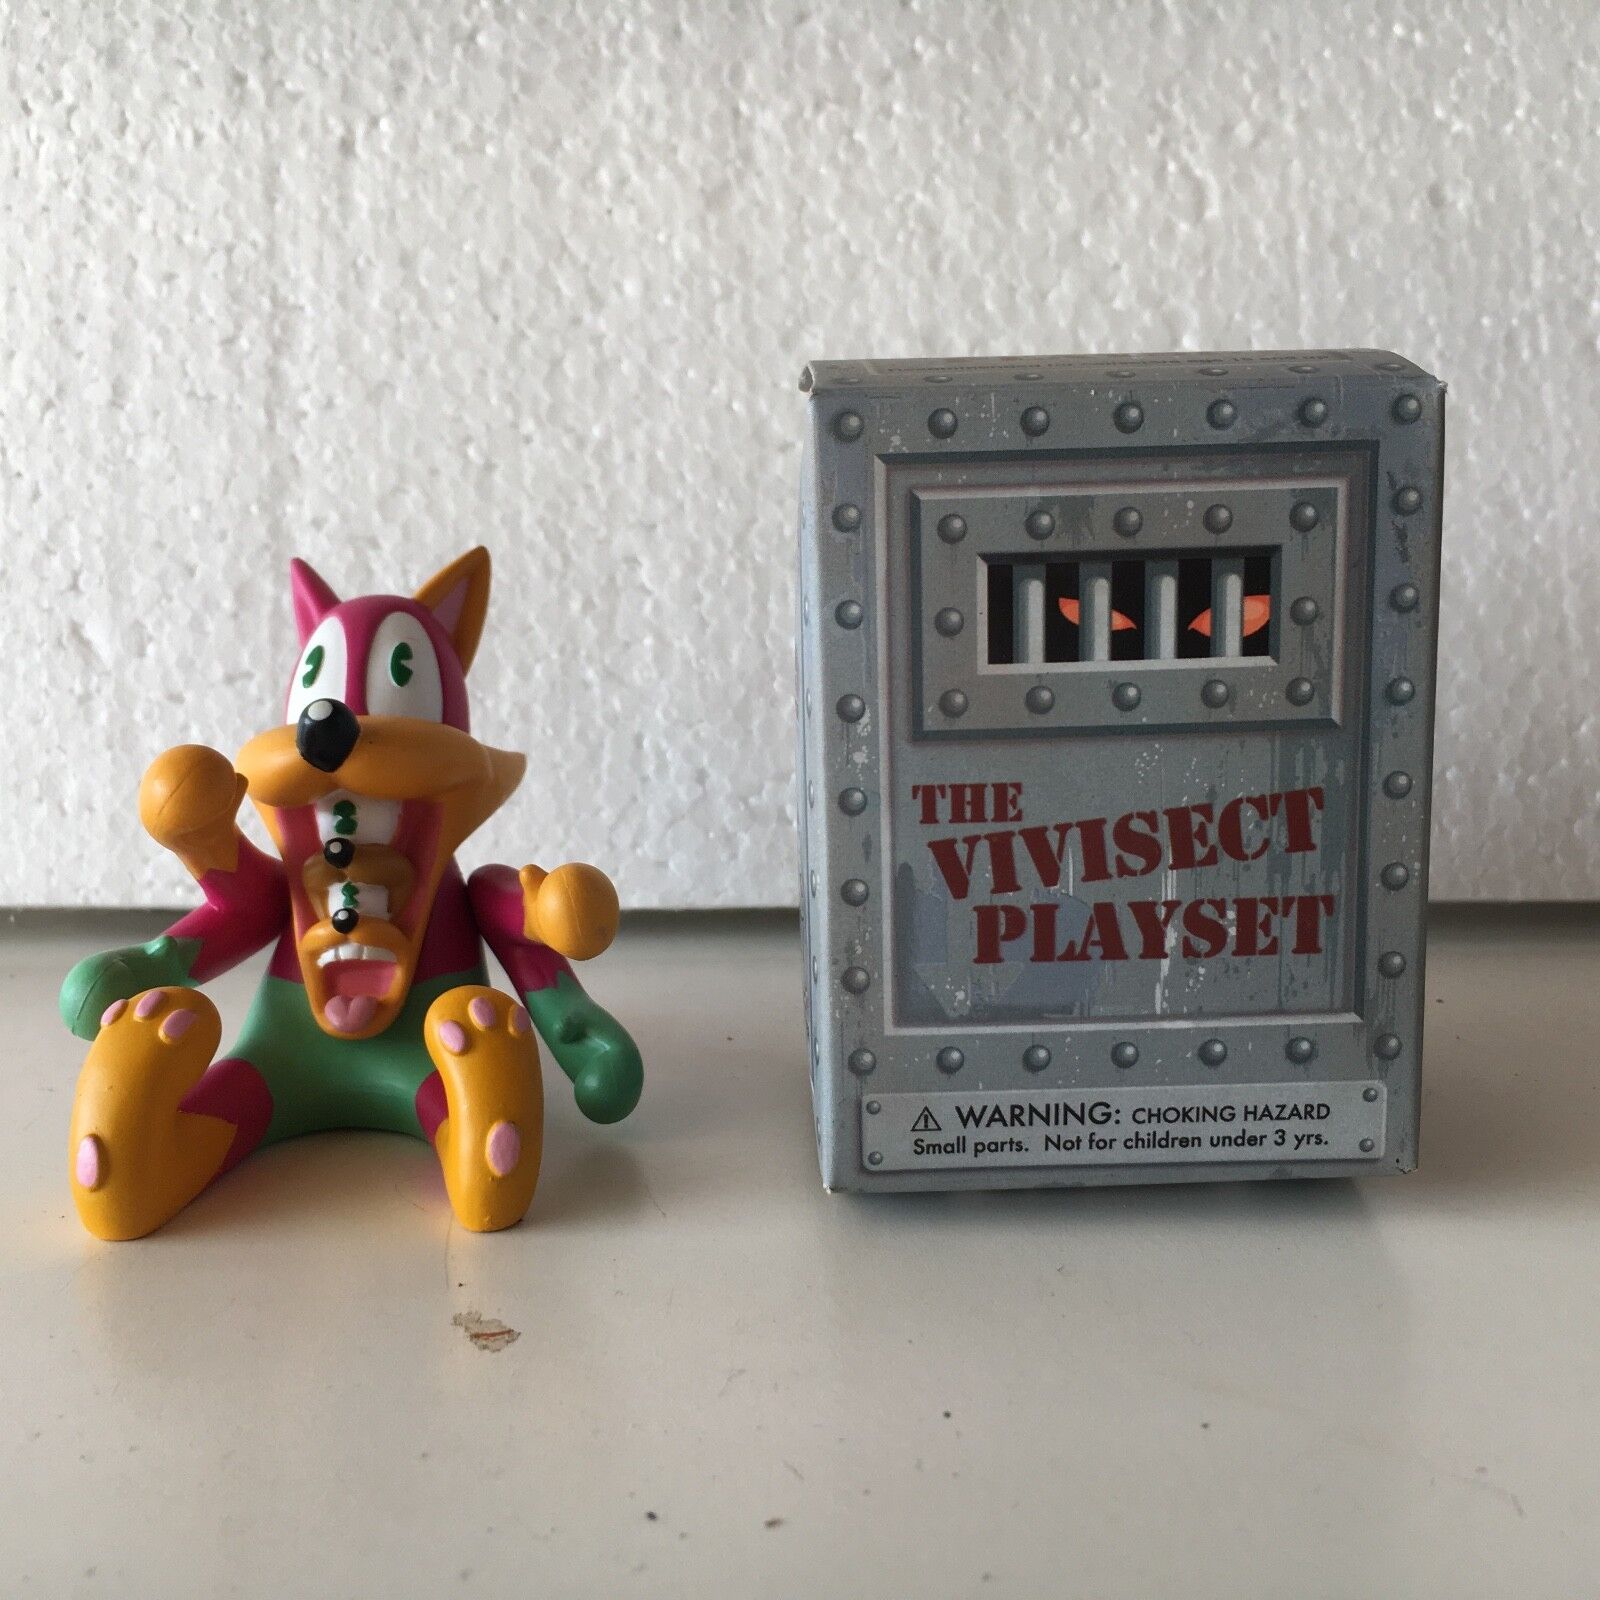 ANTHONY AUSGANG, VIVISECT PLAYSET, SIGNED BY AUSGANG